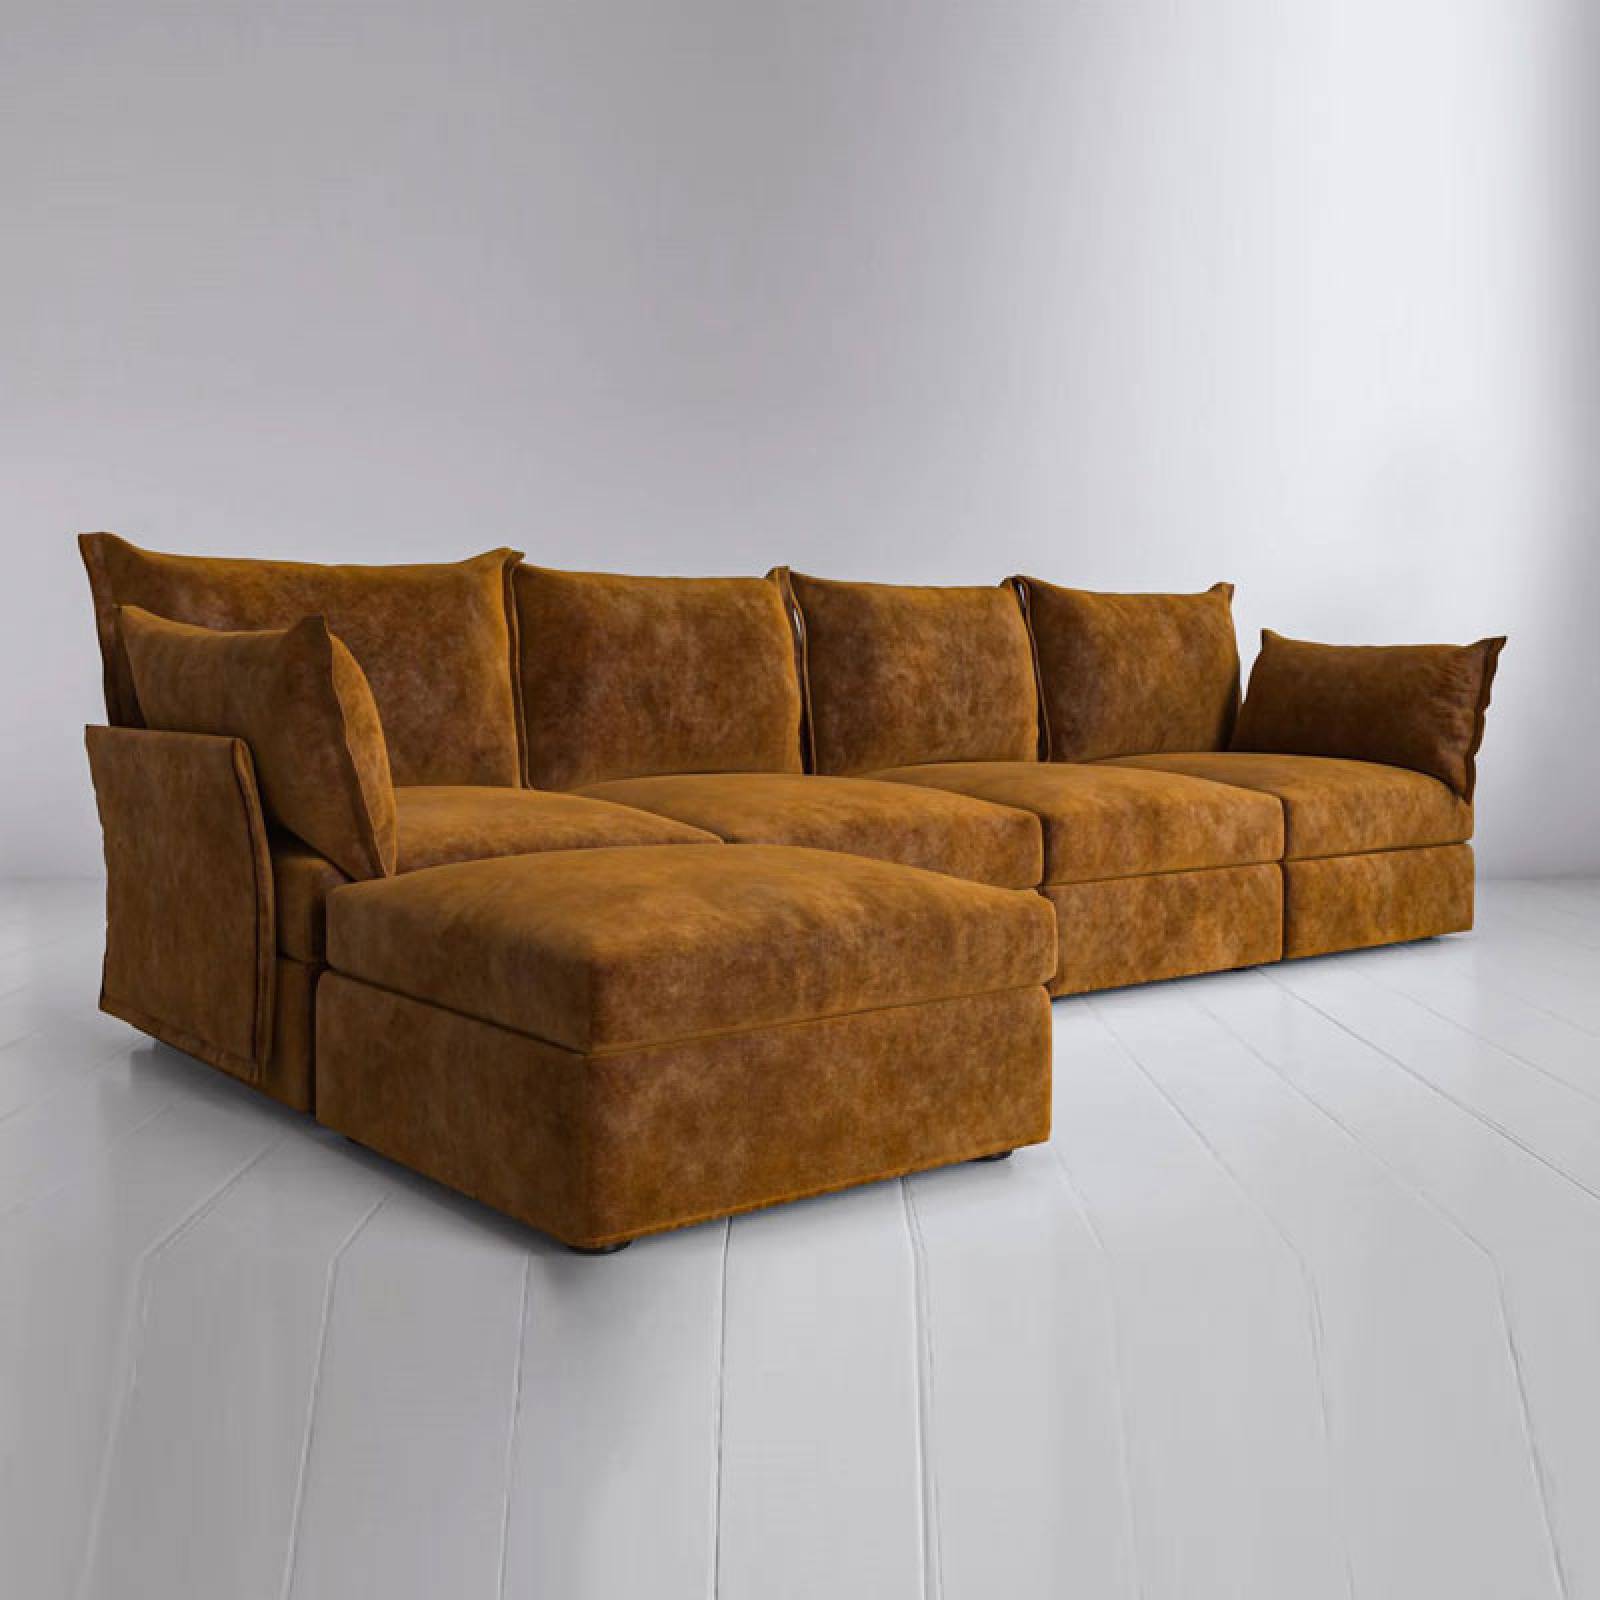 Swyft - Model 06 - 4 Seater Chaise Sofa - Left or Right thumbnails